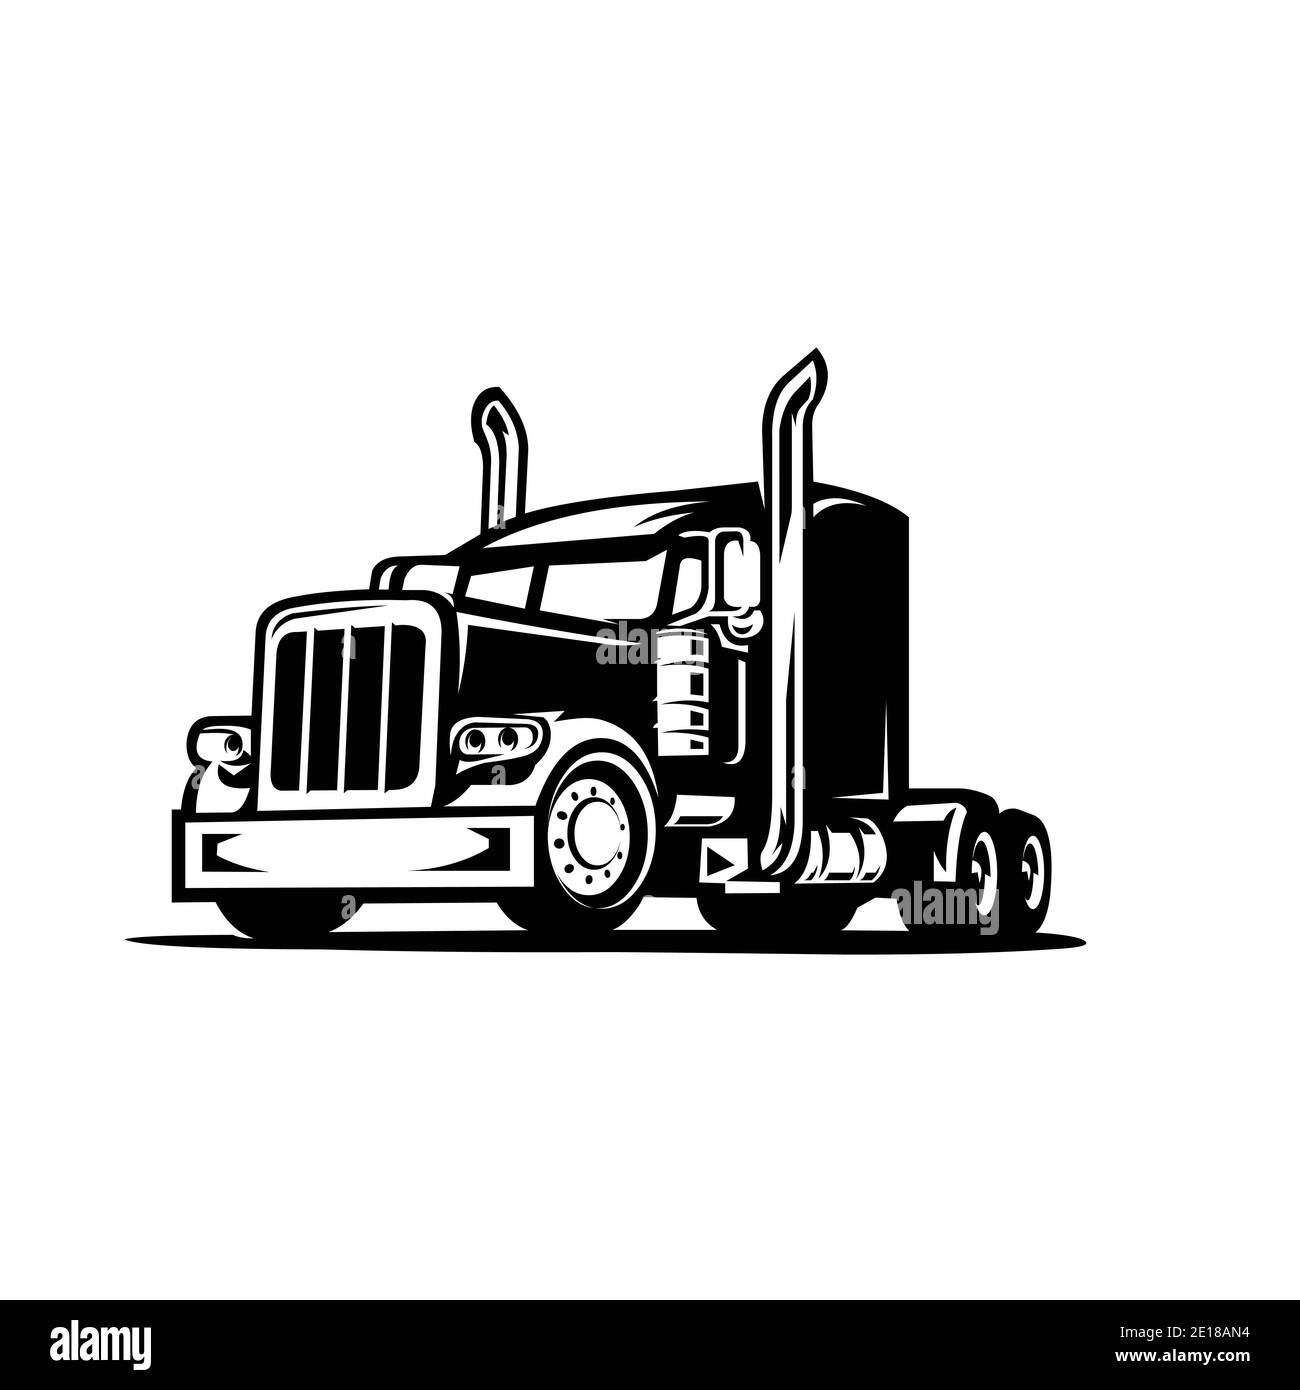 Semi truck 18 wheeler side view vector image isolated Stock Vector